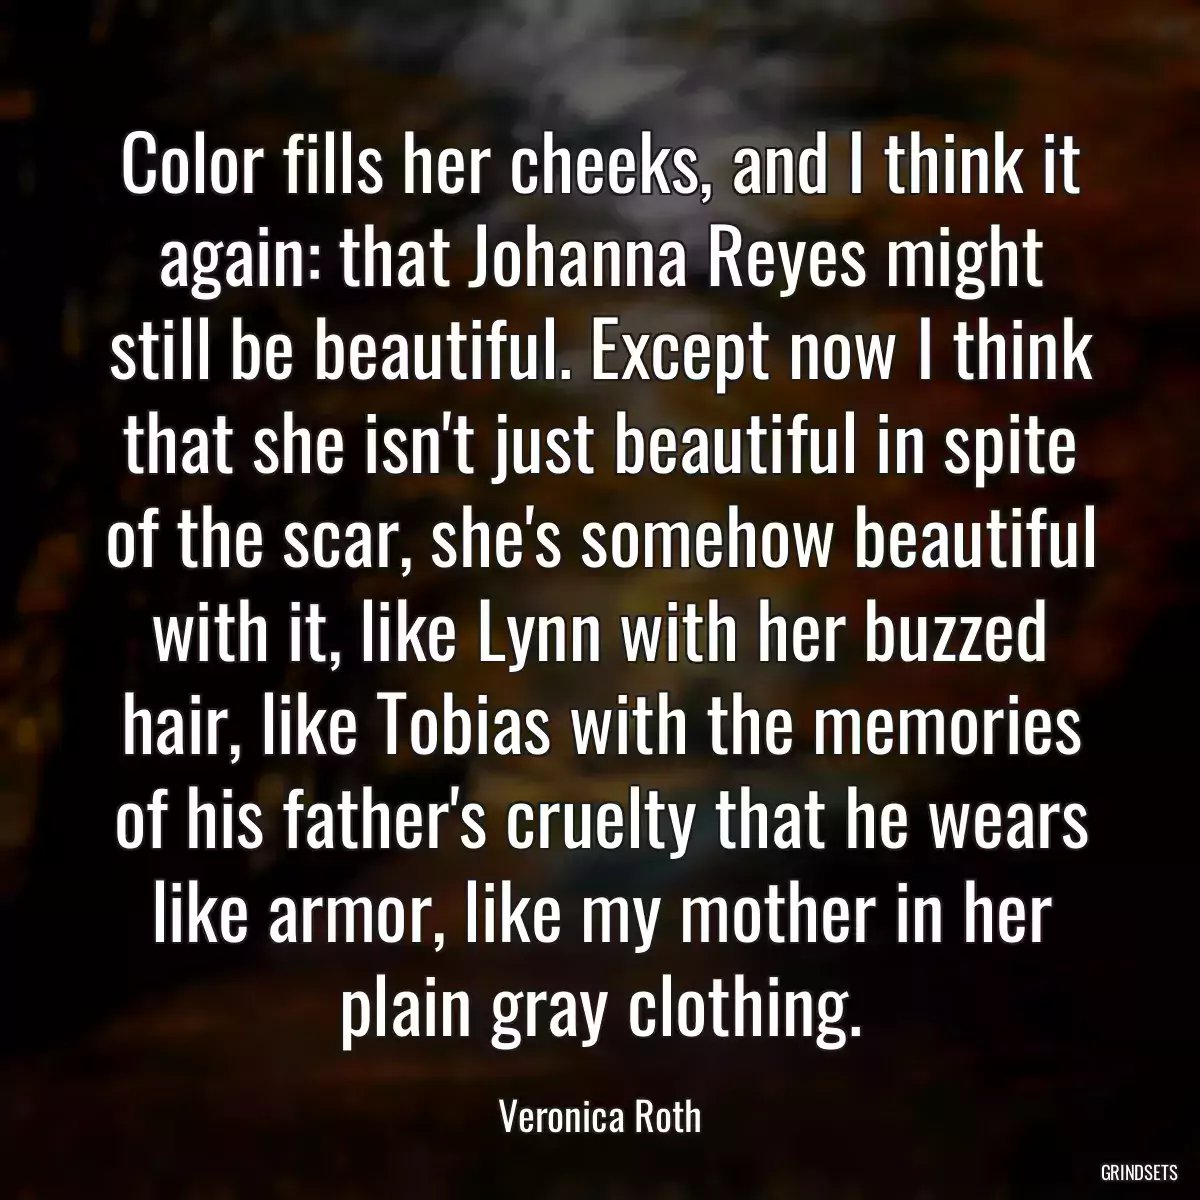 Color fills her cheeks, and I think it again: that Johanna Reyes might still be beautiful. Except now I think that she isn\'t just beautiful in spite of the scar, she\'s somehow beautiful with it, like Lynn with her buzzed hair, like Tobias with the memories of his father\'s cruelty that he wears like armor, like my mother in her plain gray clothing.